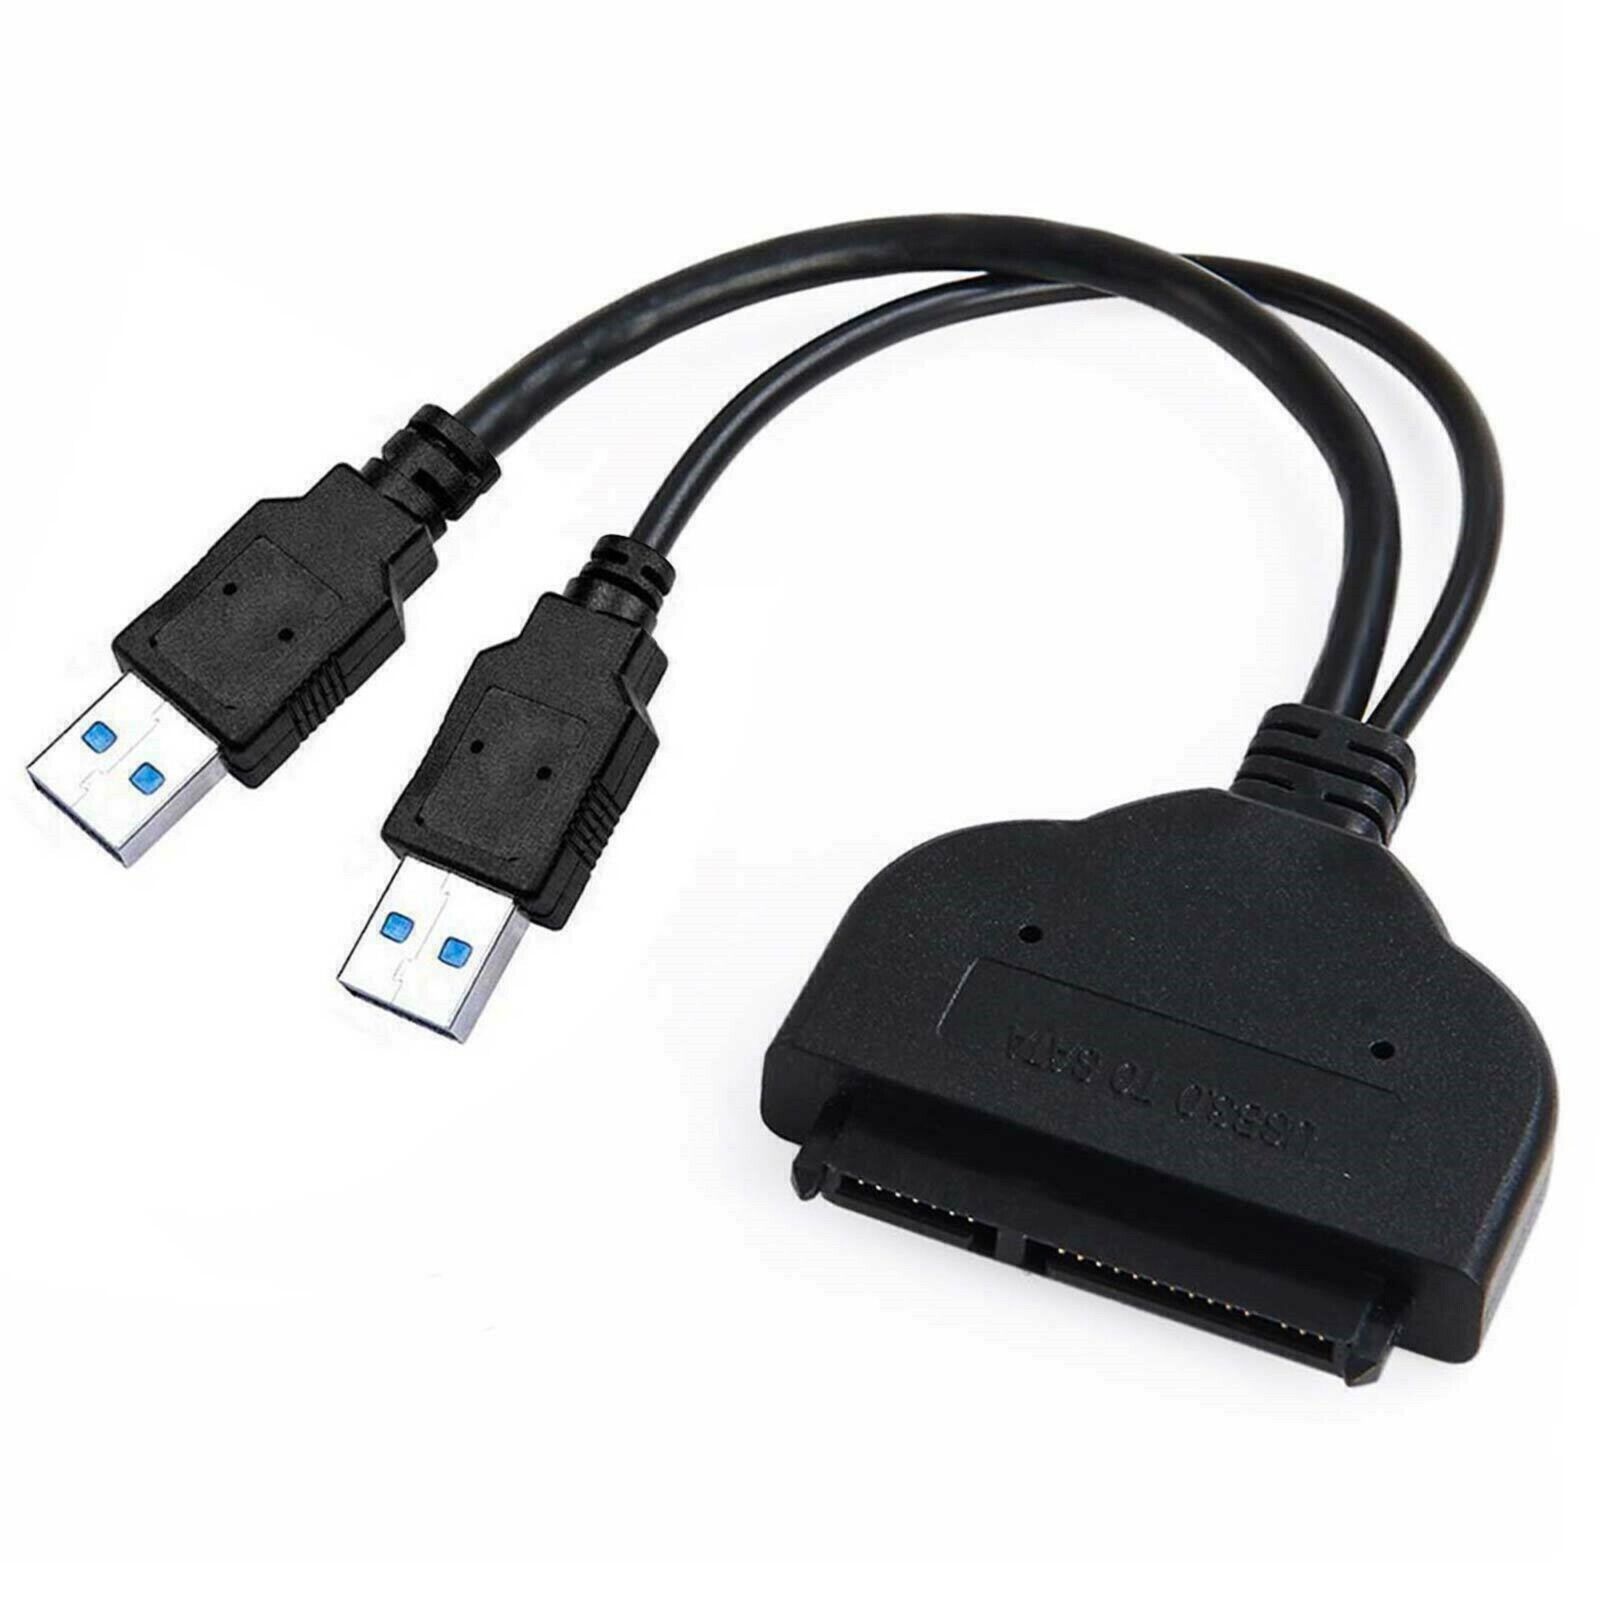 USB 3.0 to 2.5 External Hard Disk Adapter Cable - Contrado Digital